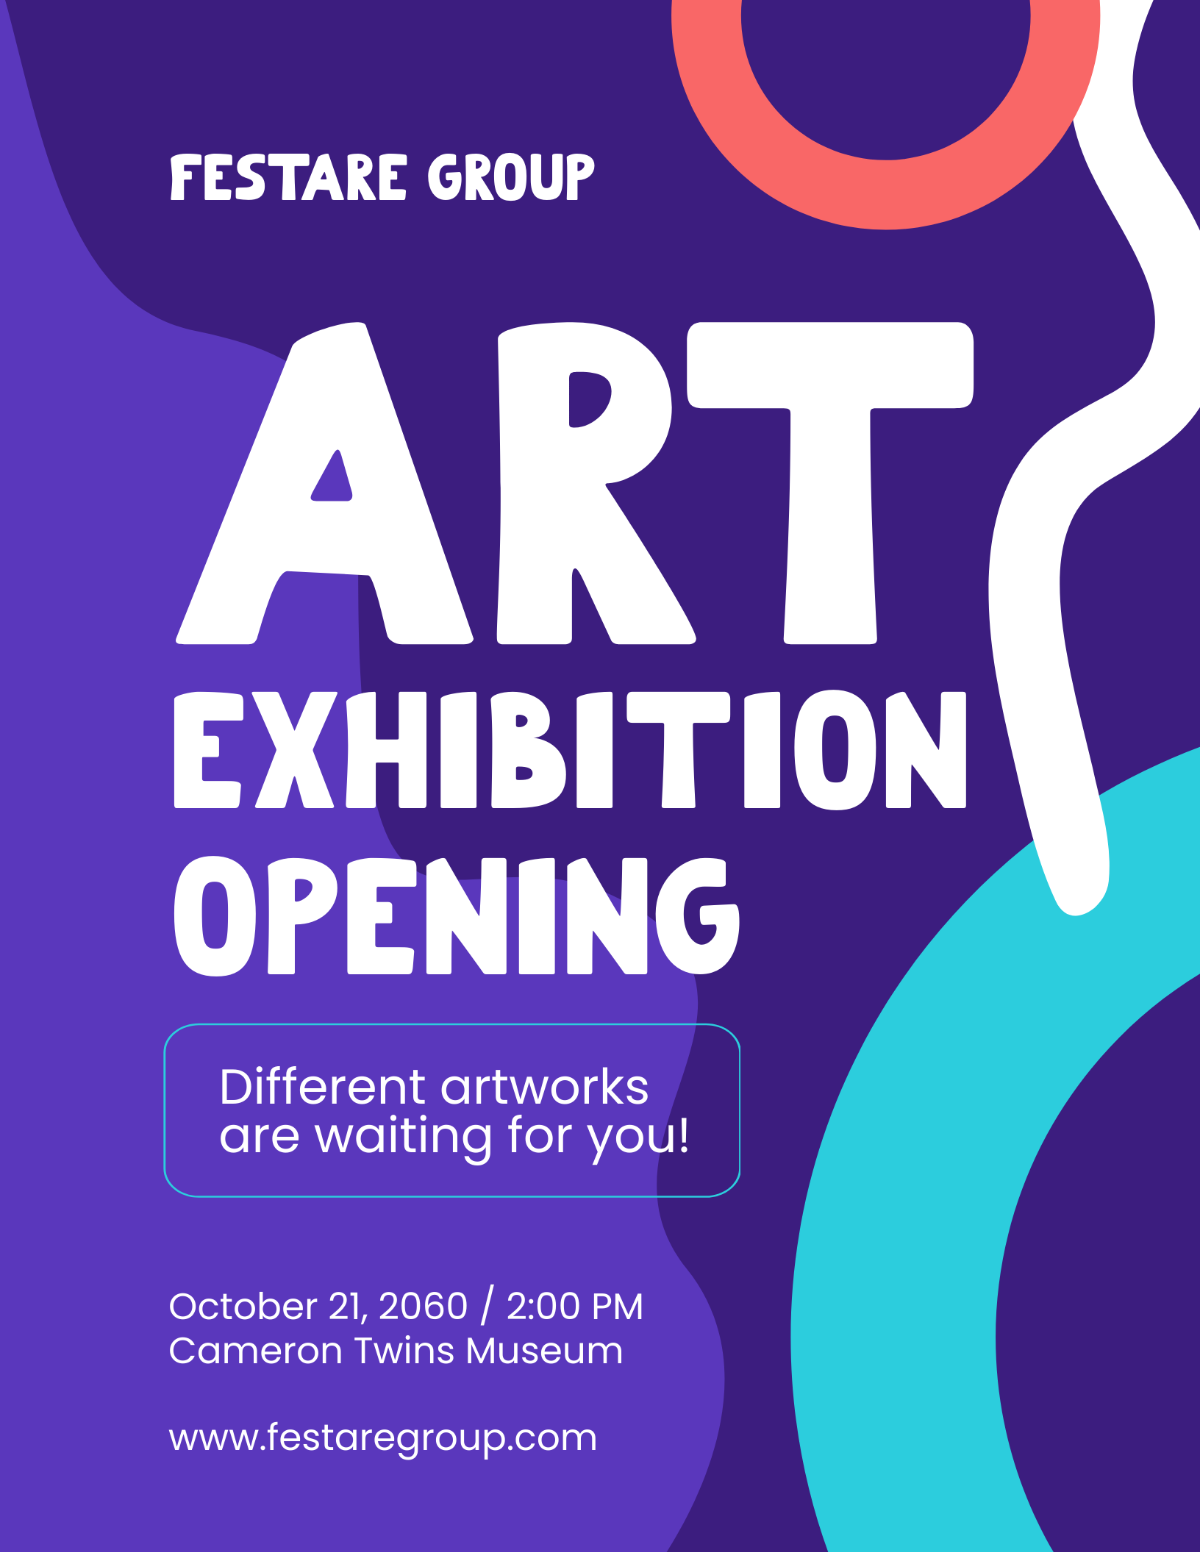 Art Exhibition Opening Flyer Template